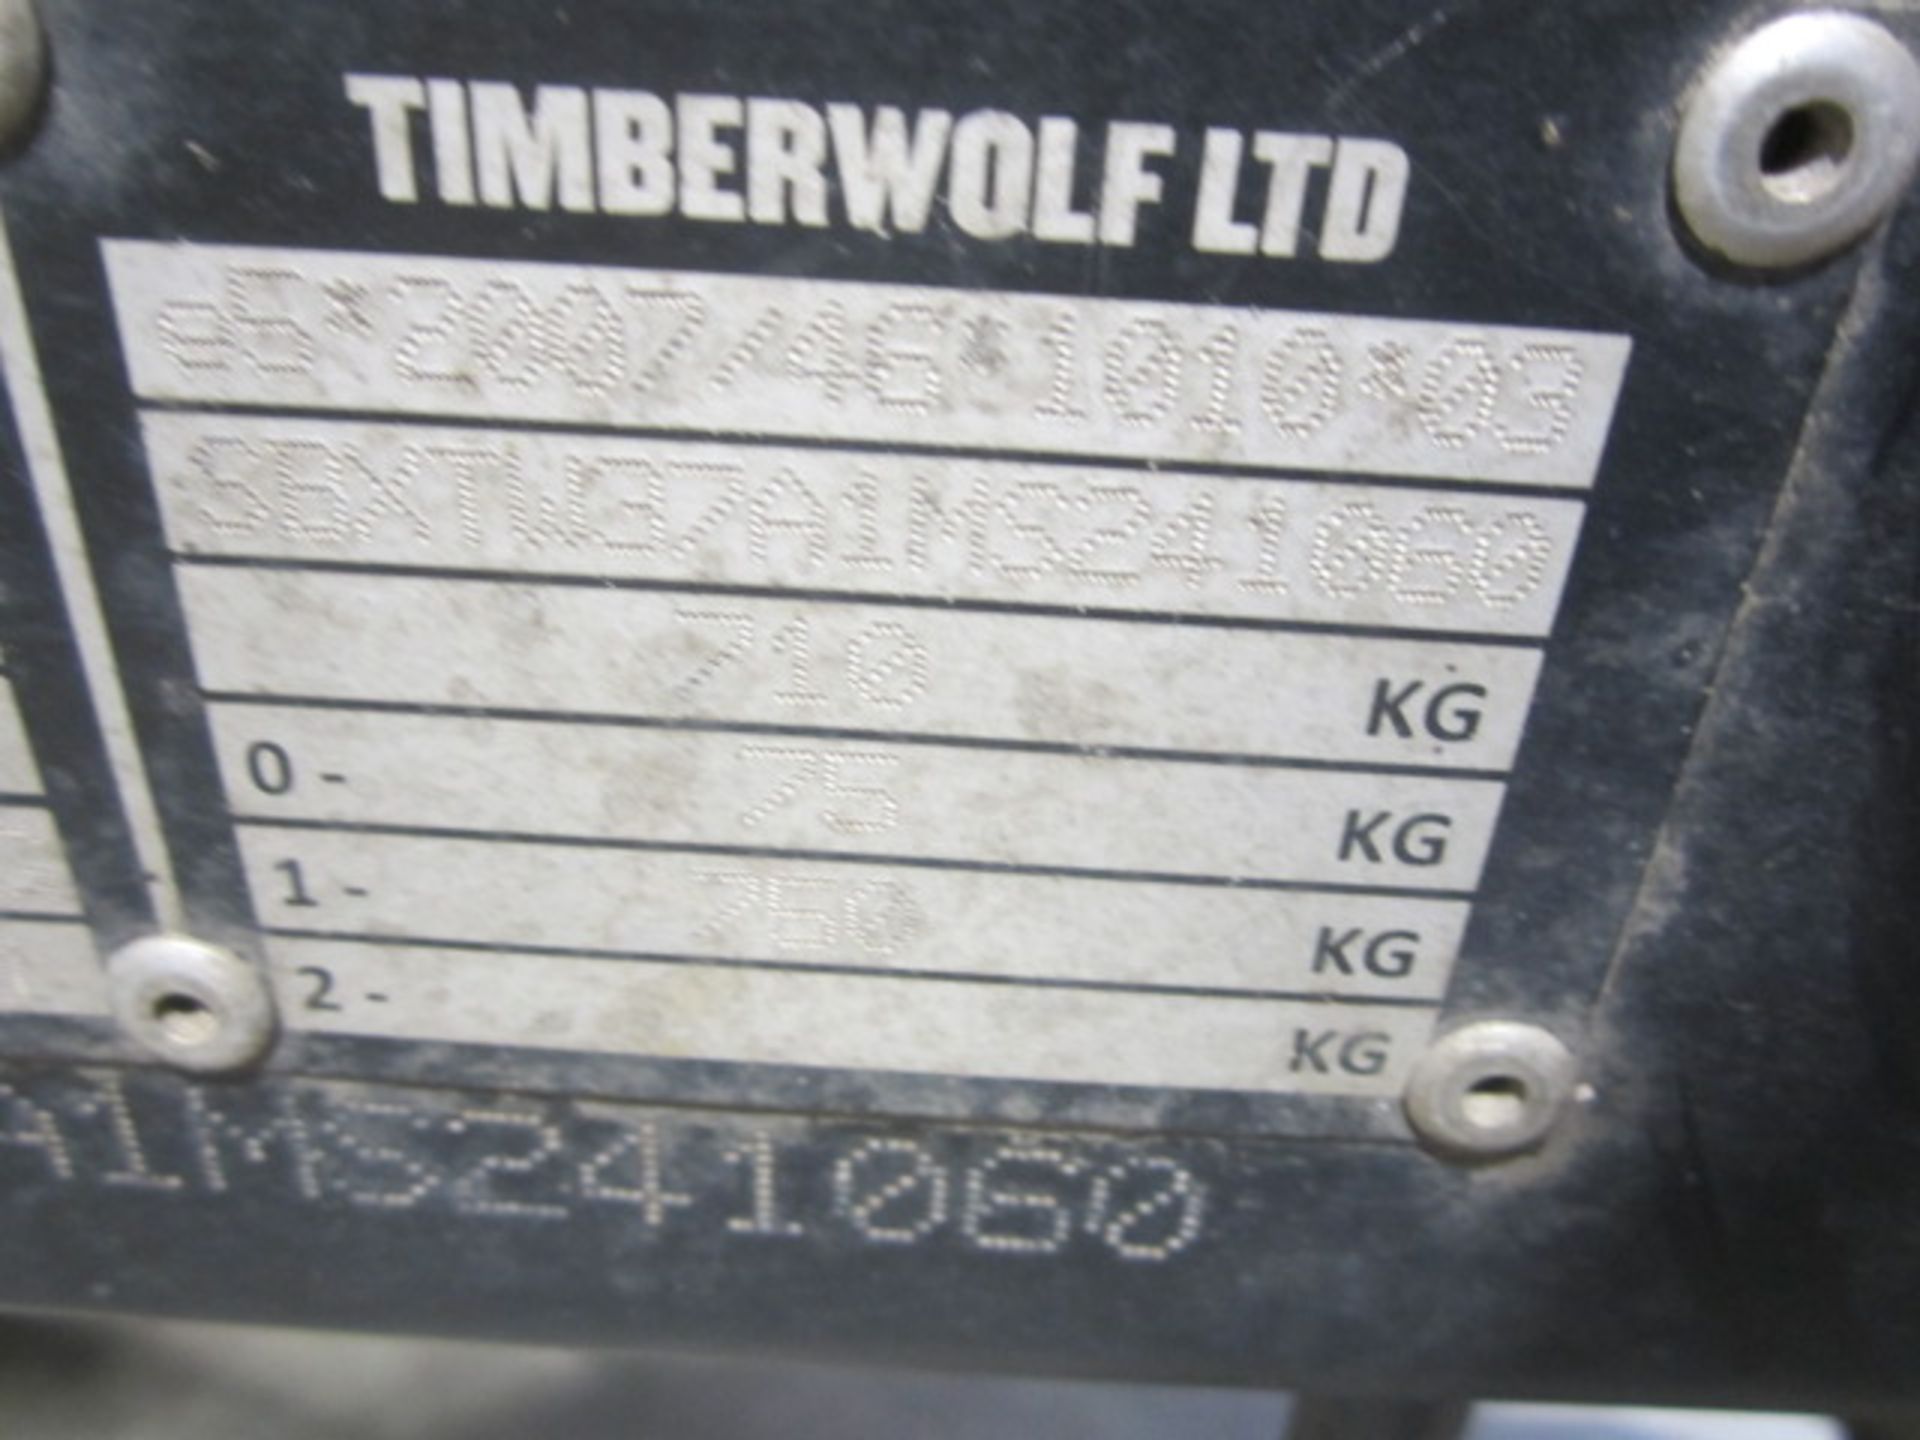 Timber Wolf TW230HB, Sub 750kg petrol single axle towable chipper, serial number 37A1MS2411060 ( - Image 8 of 10